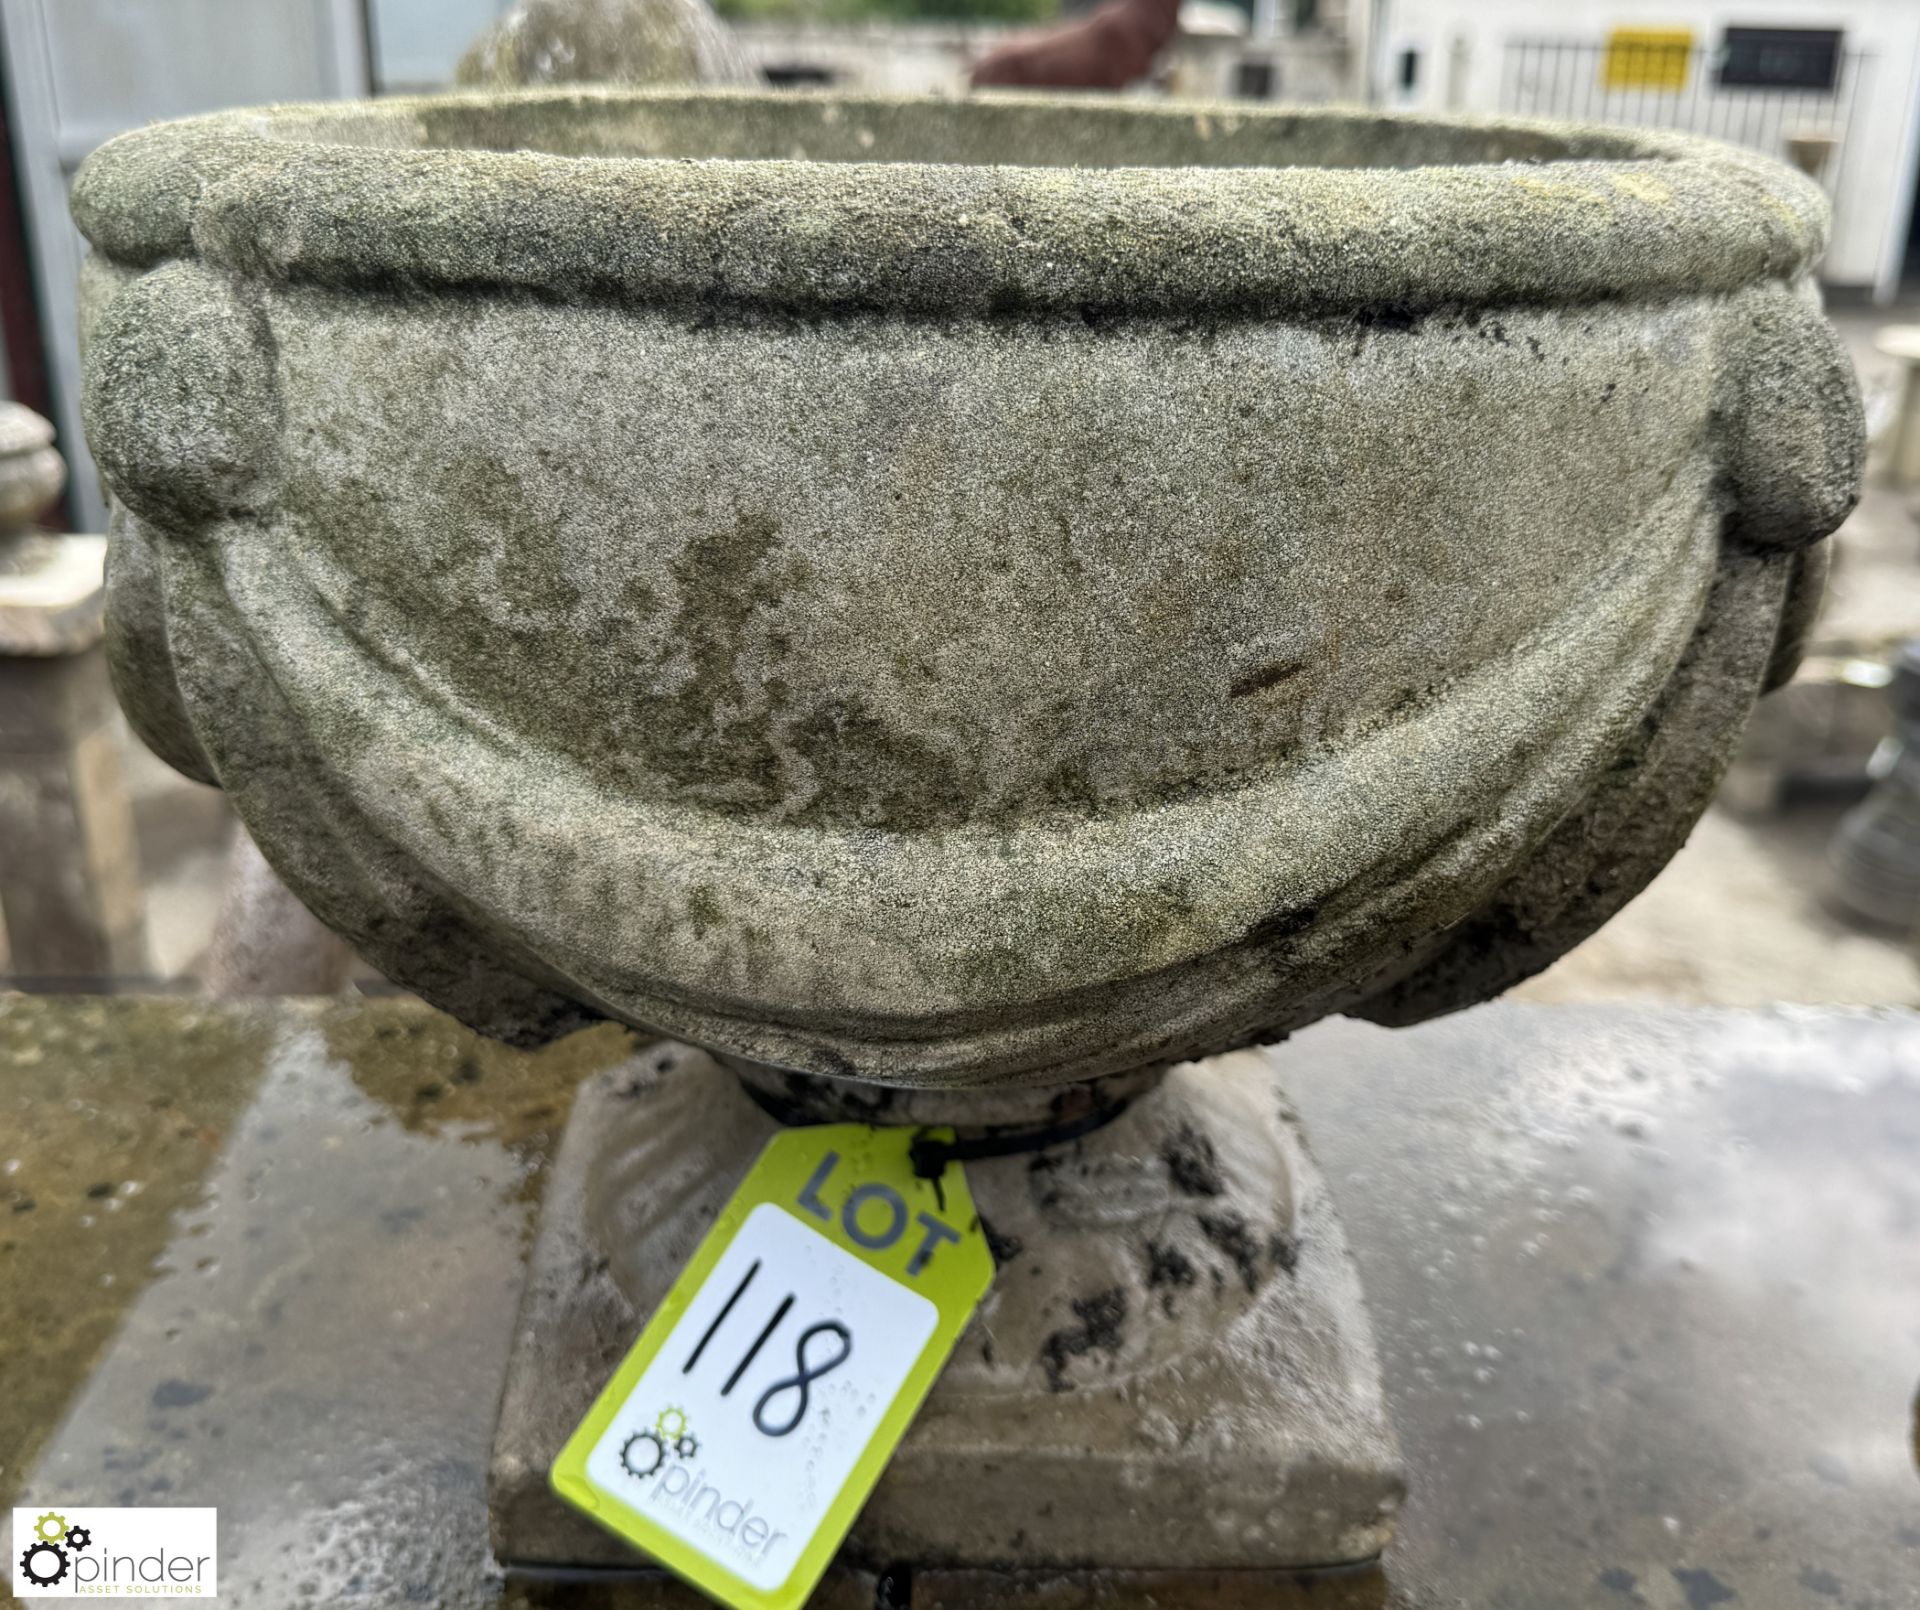 A reconstituted stone Garden Urn, with swag decoration, approx. 14in x 17in diameter